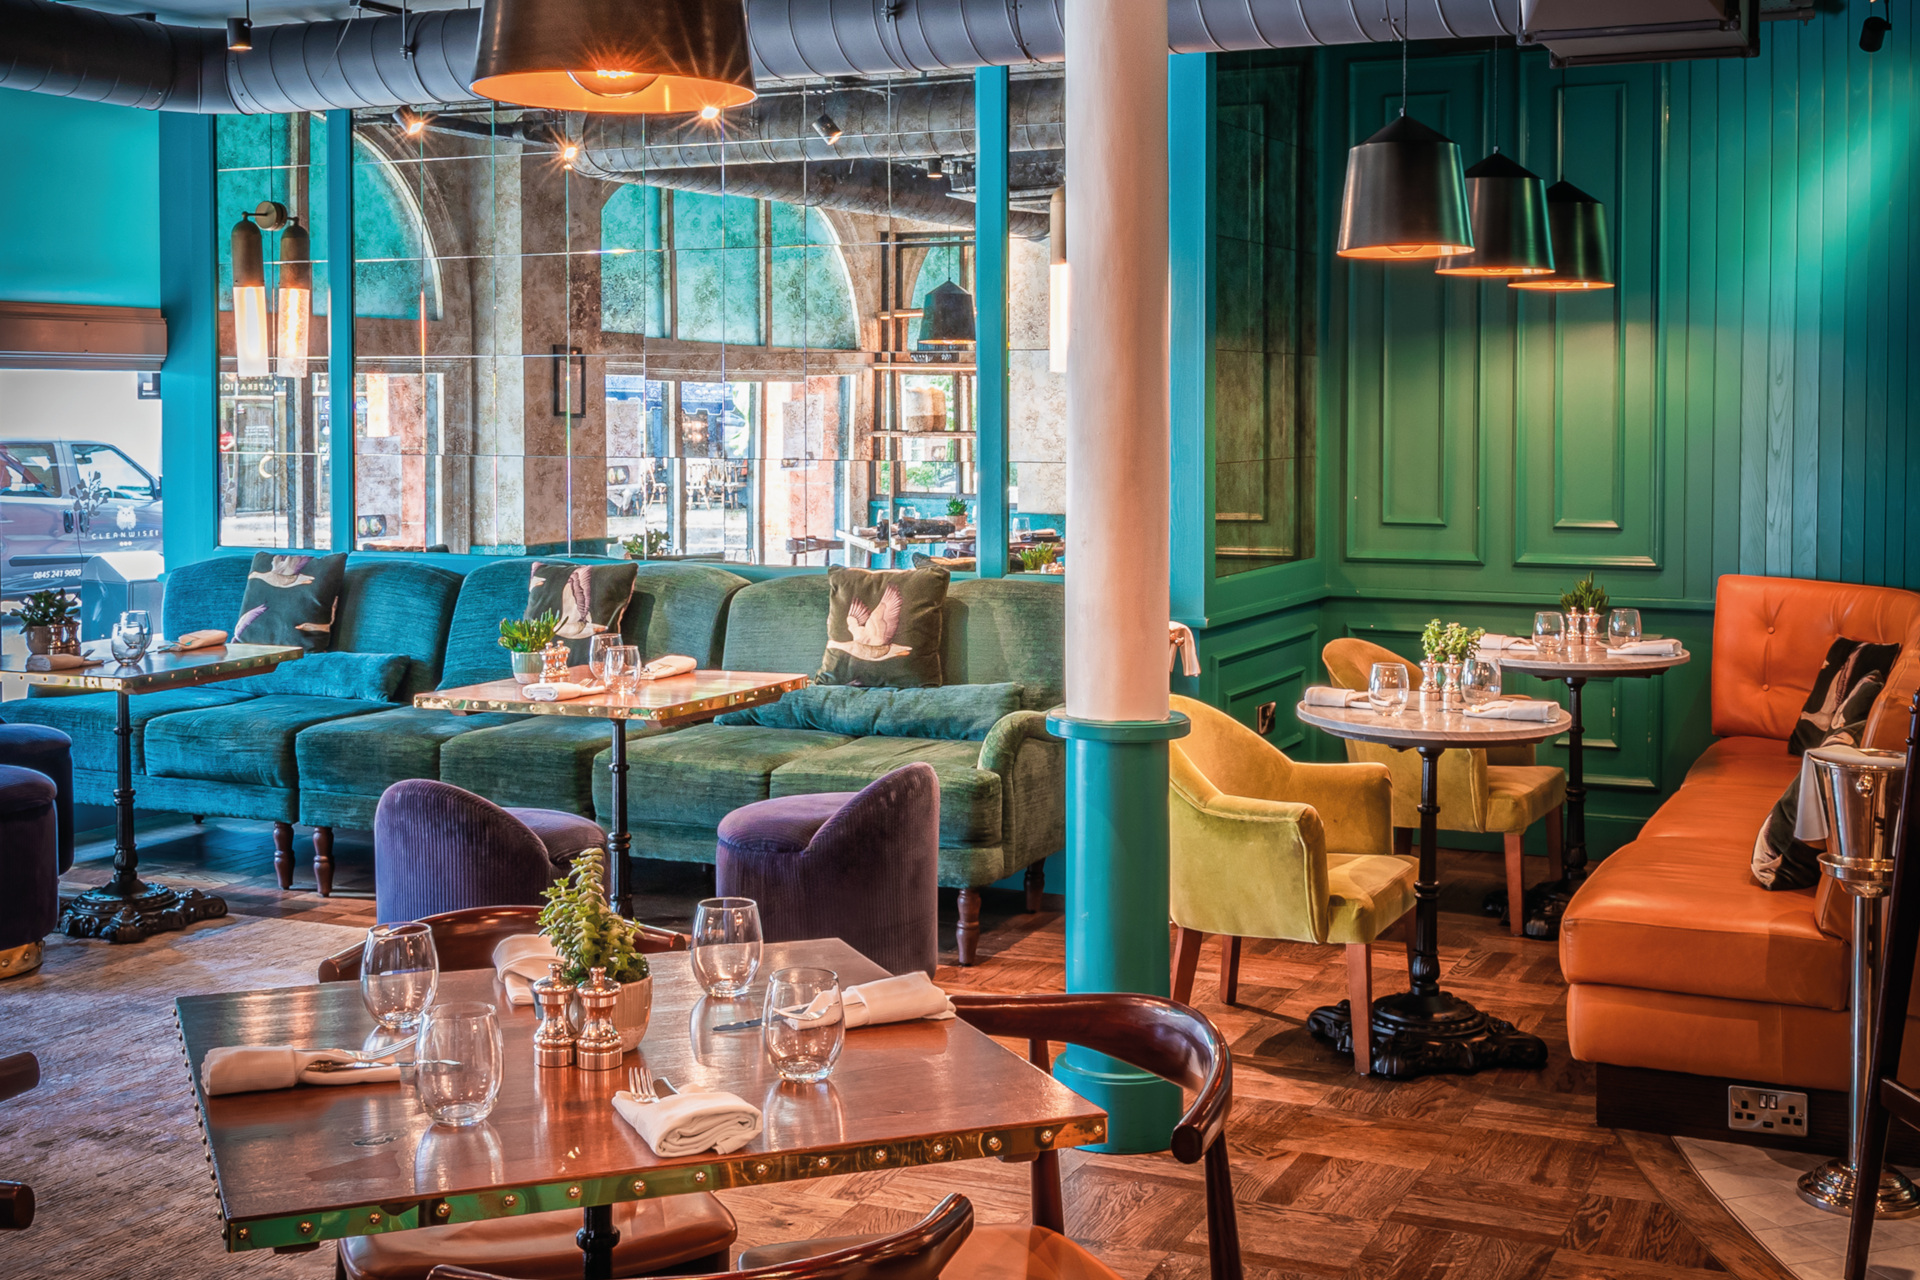 Restaurant with turquoise wood panelling and sofas, wooden tables and chairs